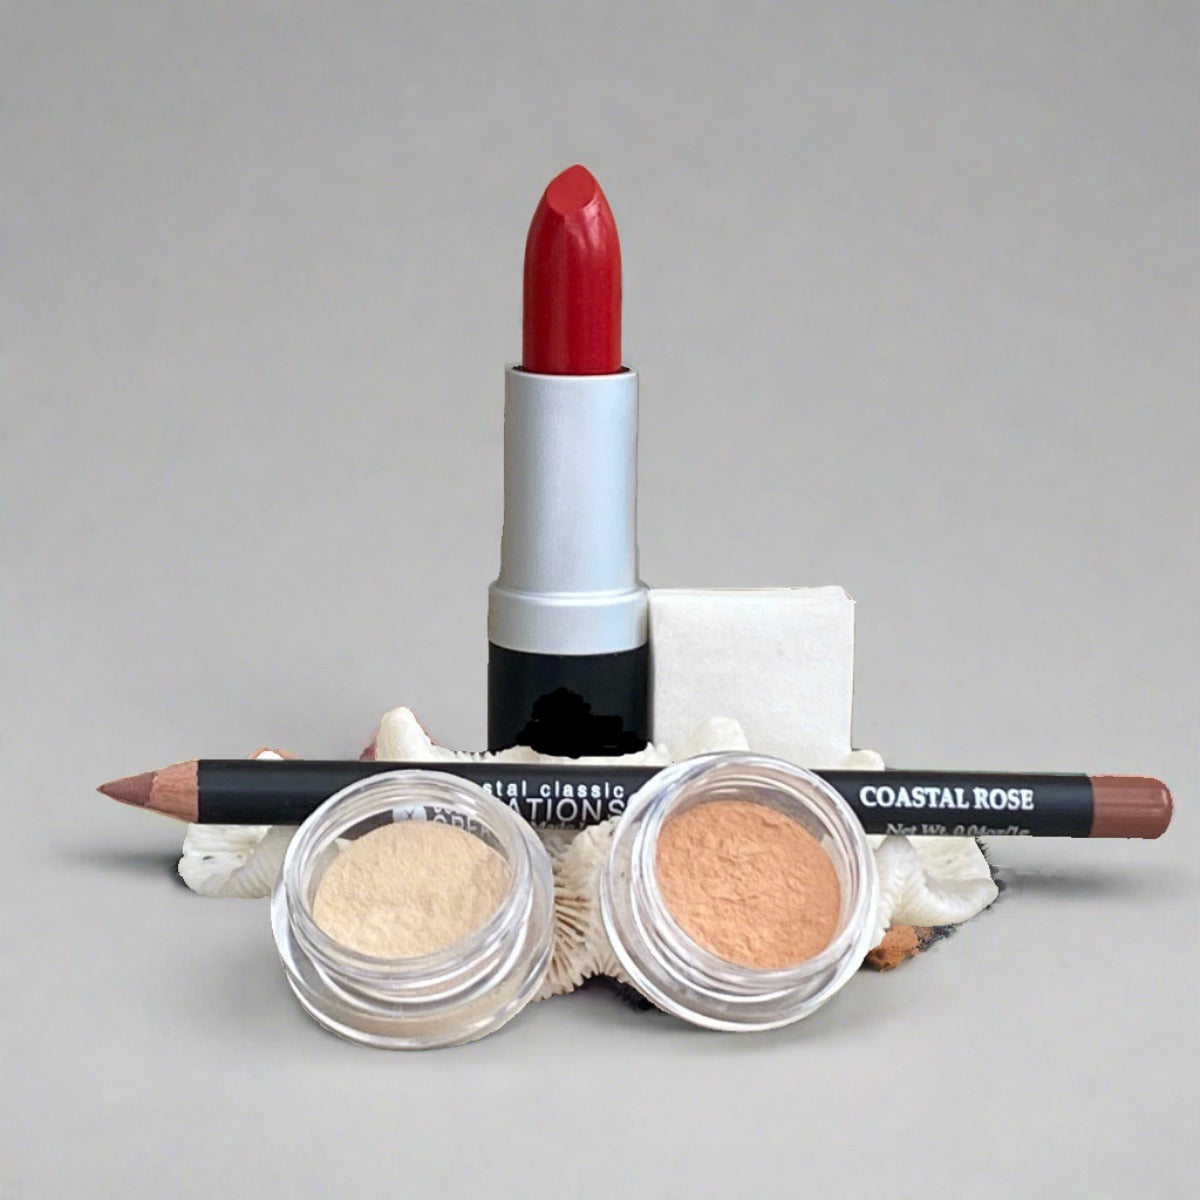 Lipstick, lip crayon, complimentary foundation products you configure